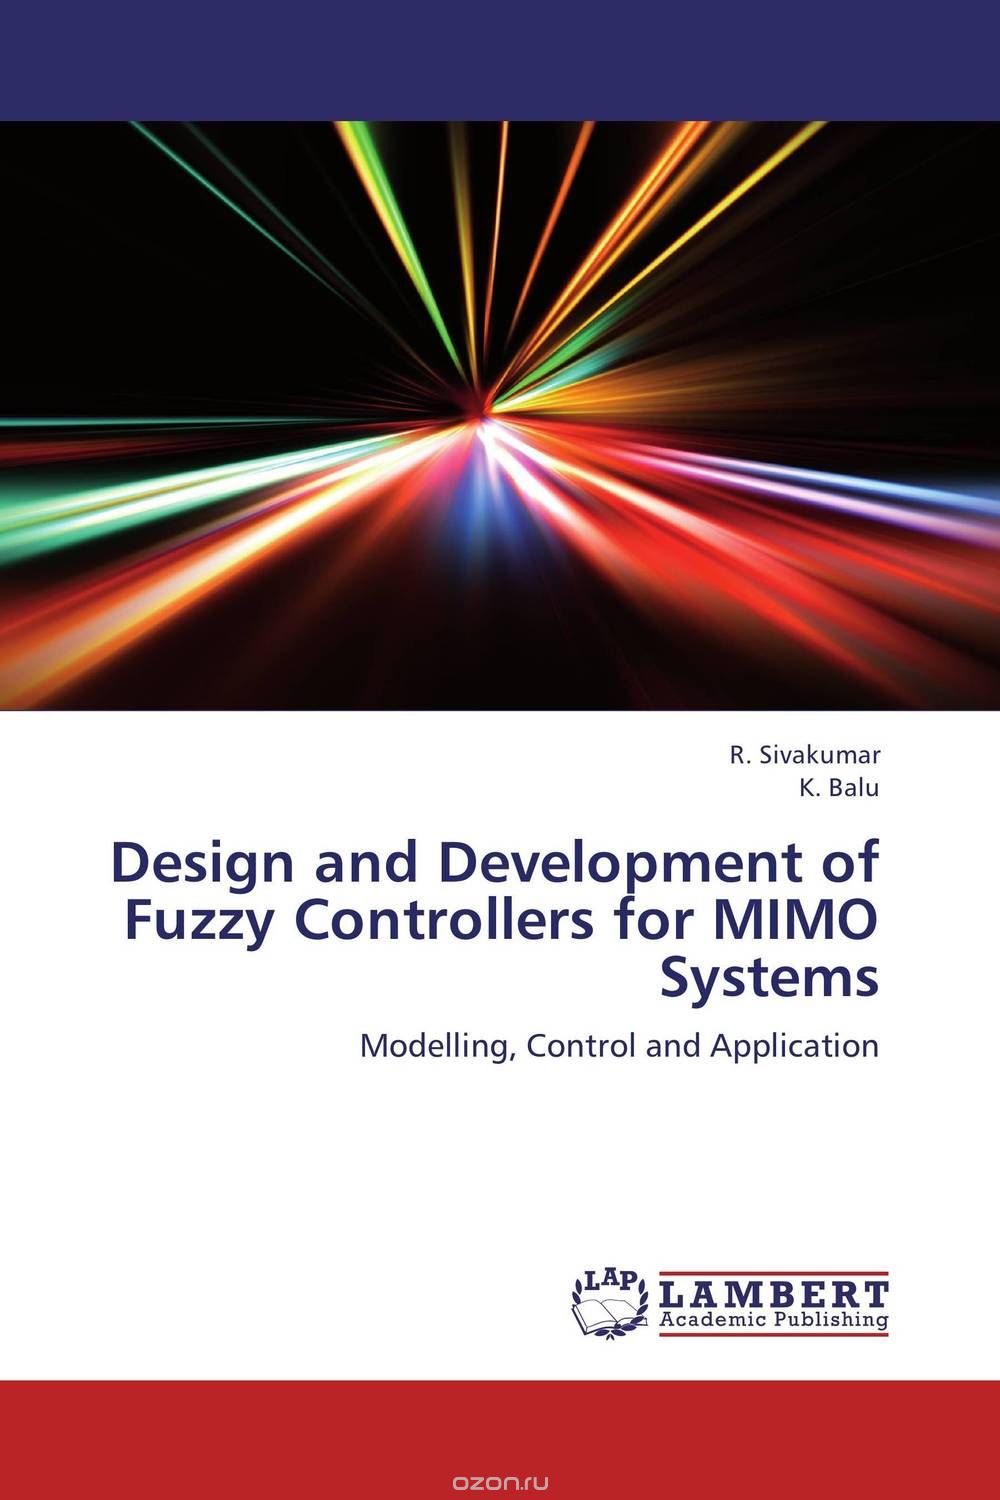 Скачать книгу "Design and Development of Fuzzy Controllers for MIMO Systems"